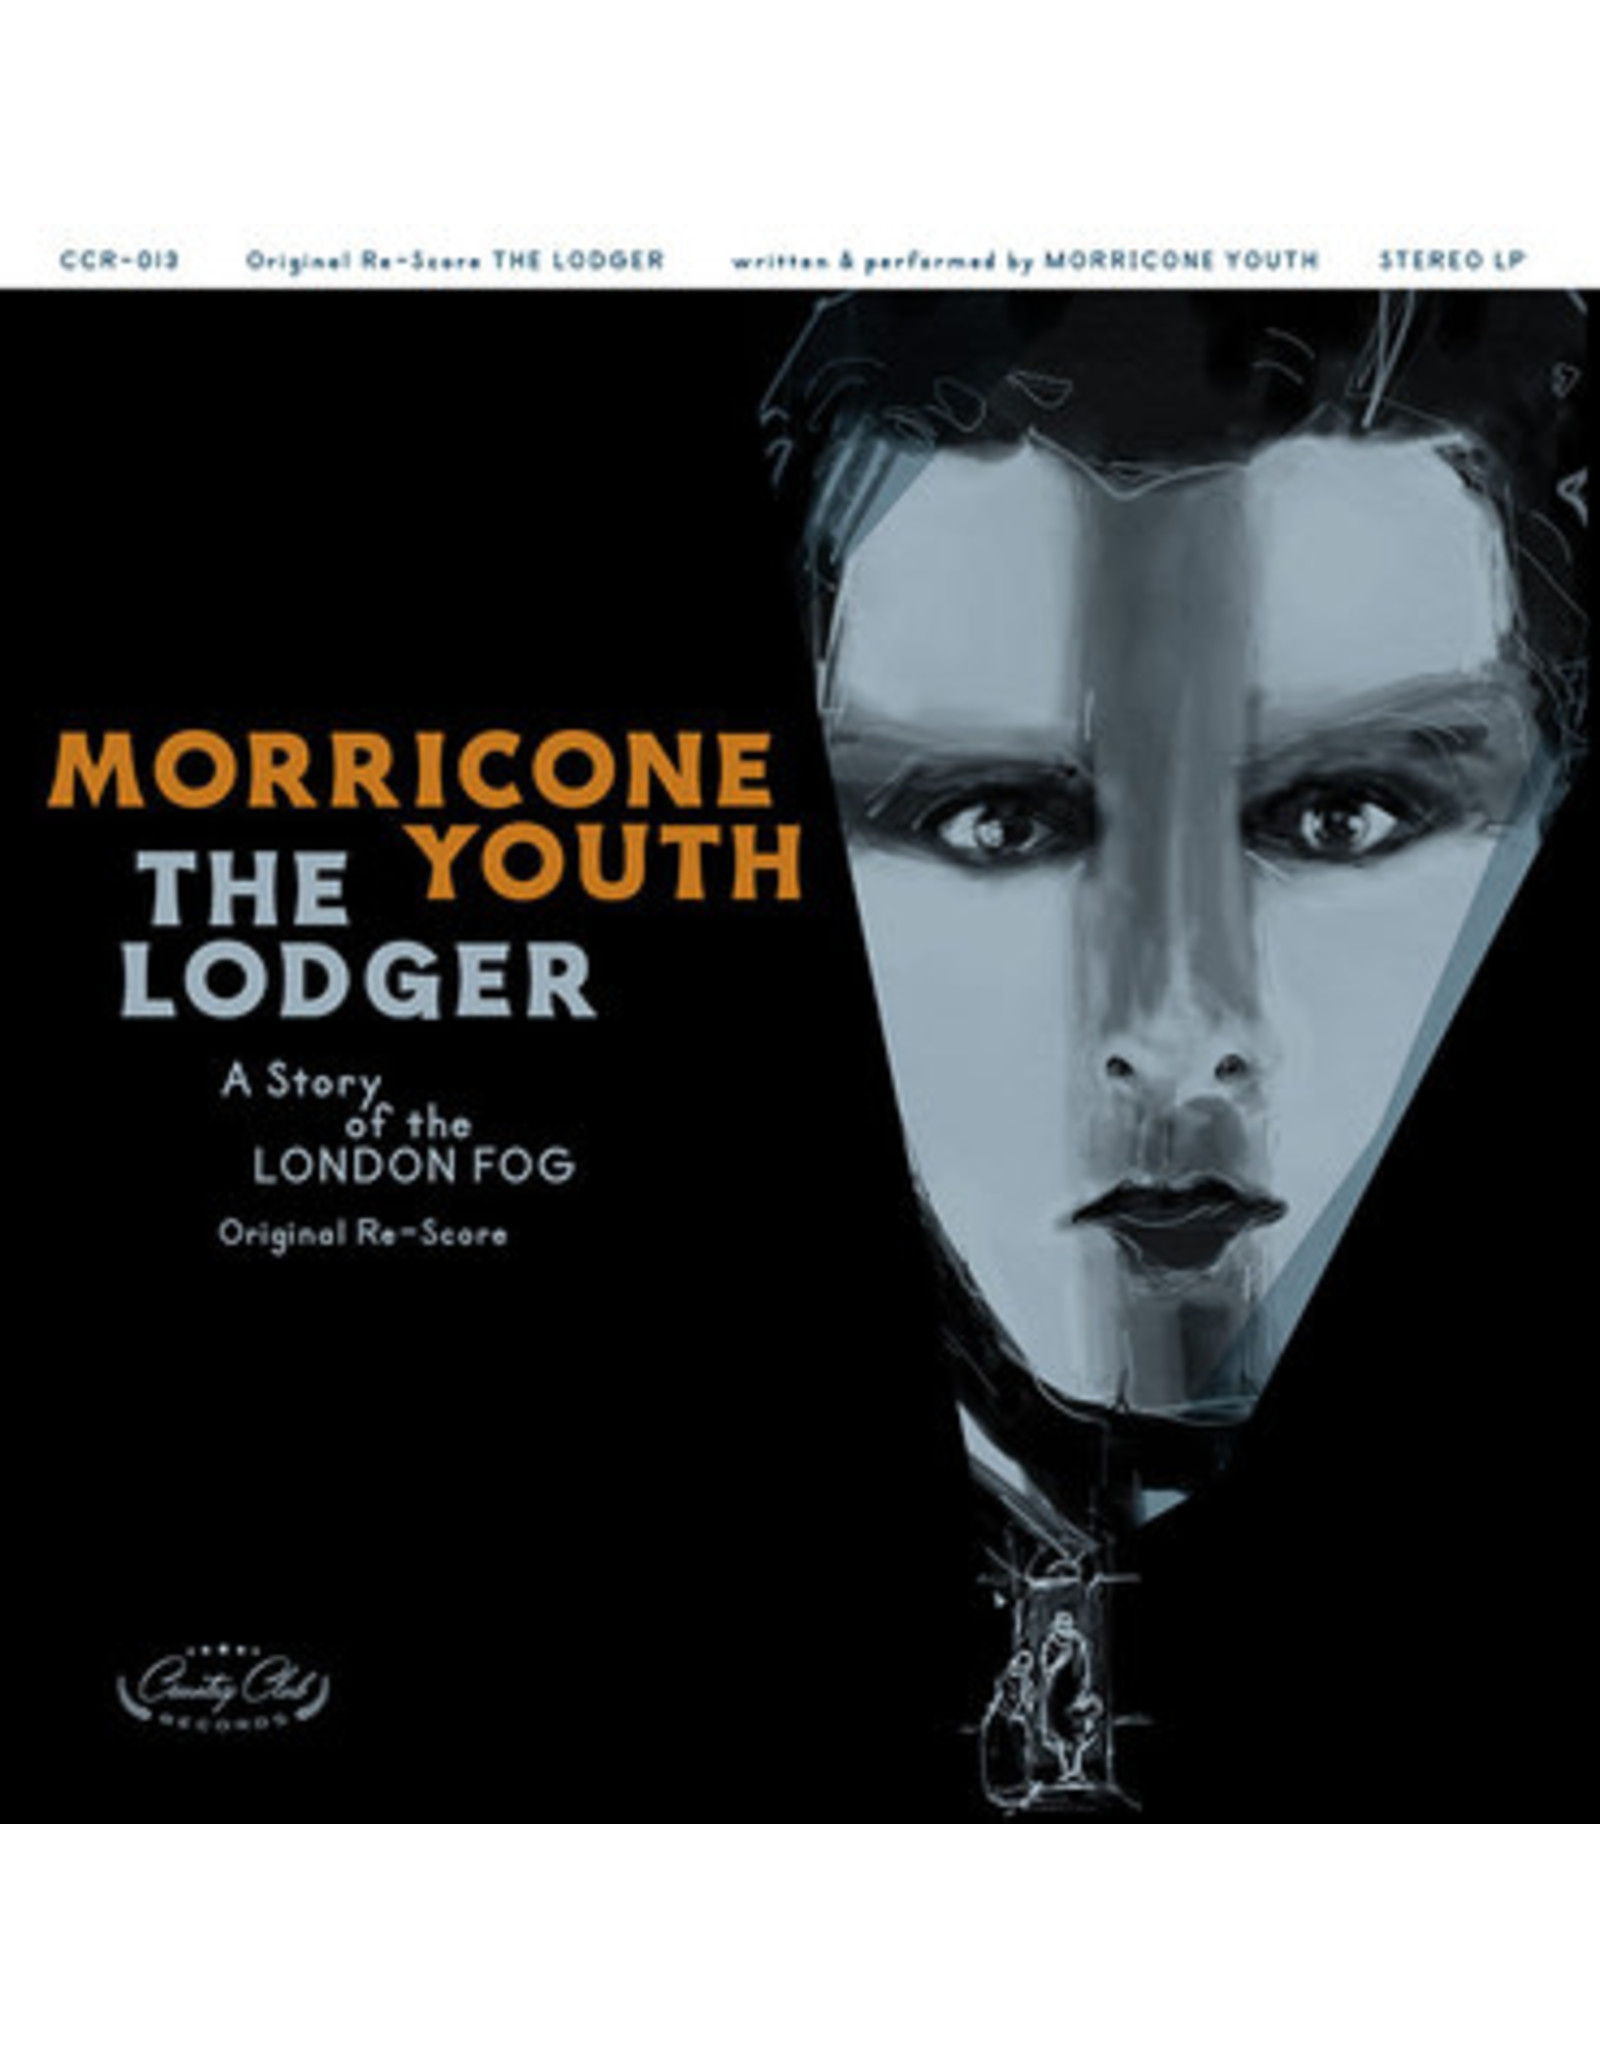 Country Club Morricone Youth: 2021RSD1 - The Lodger: A Story of the London Fog LP